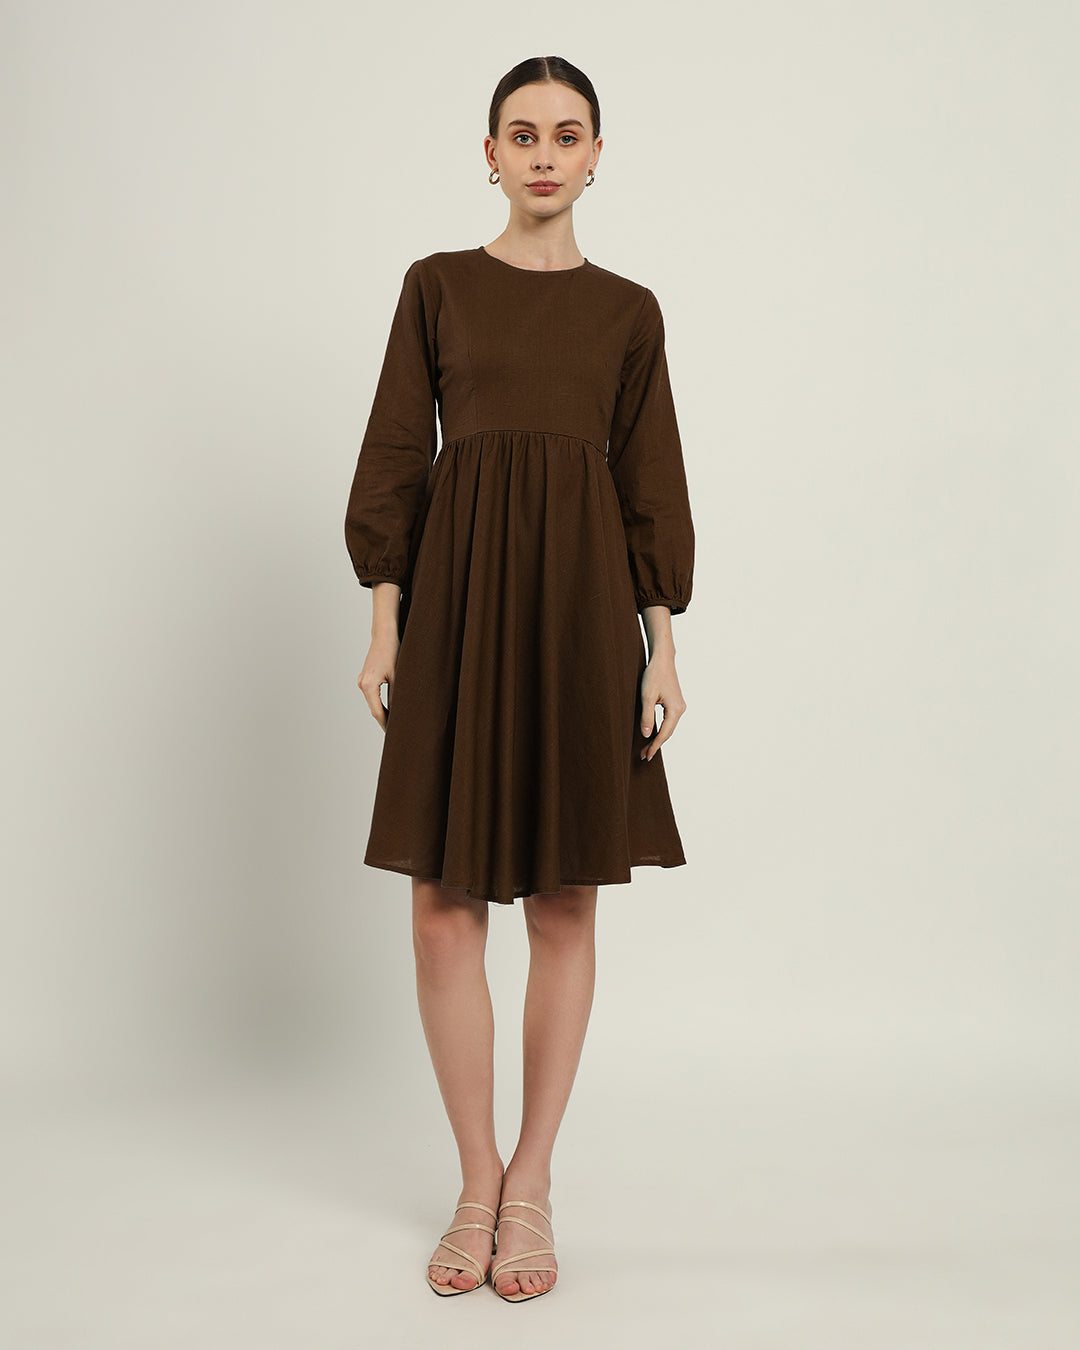 The Exeter Nutshell Dress